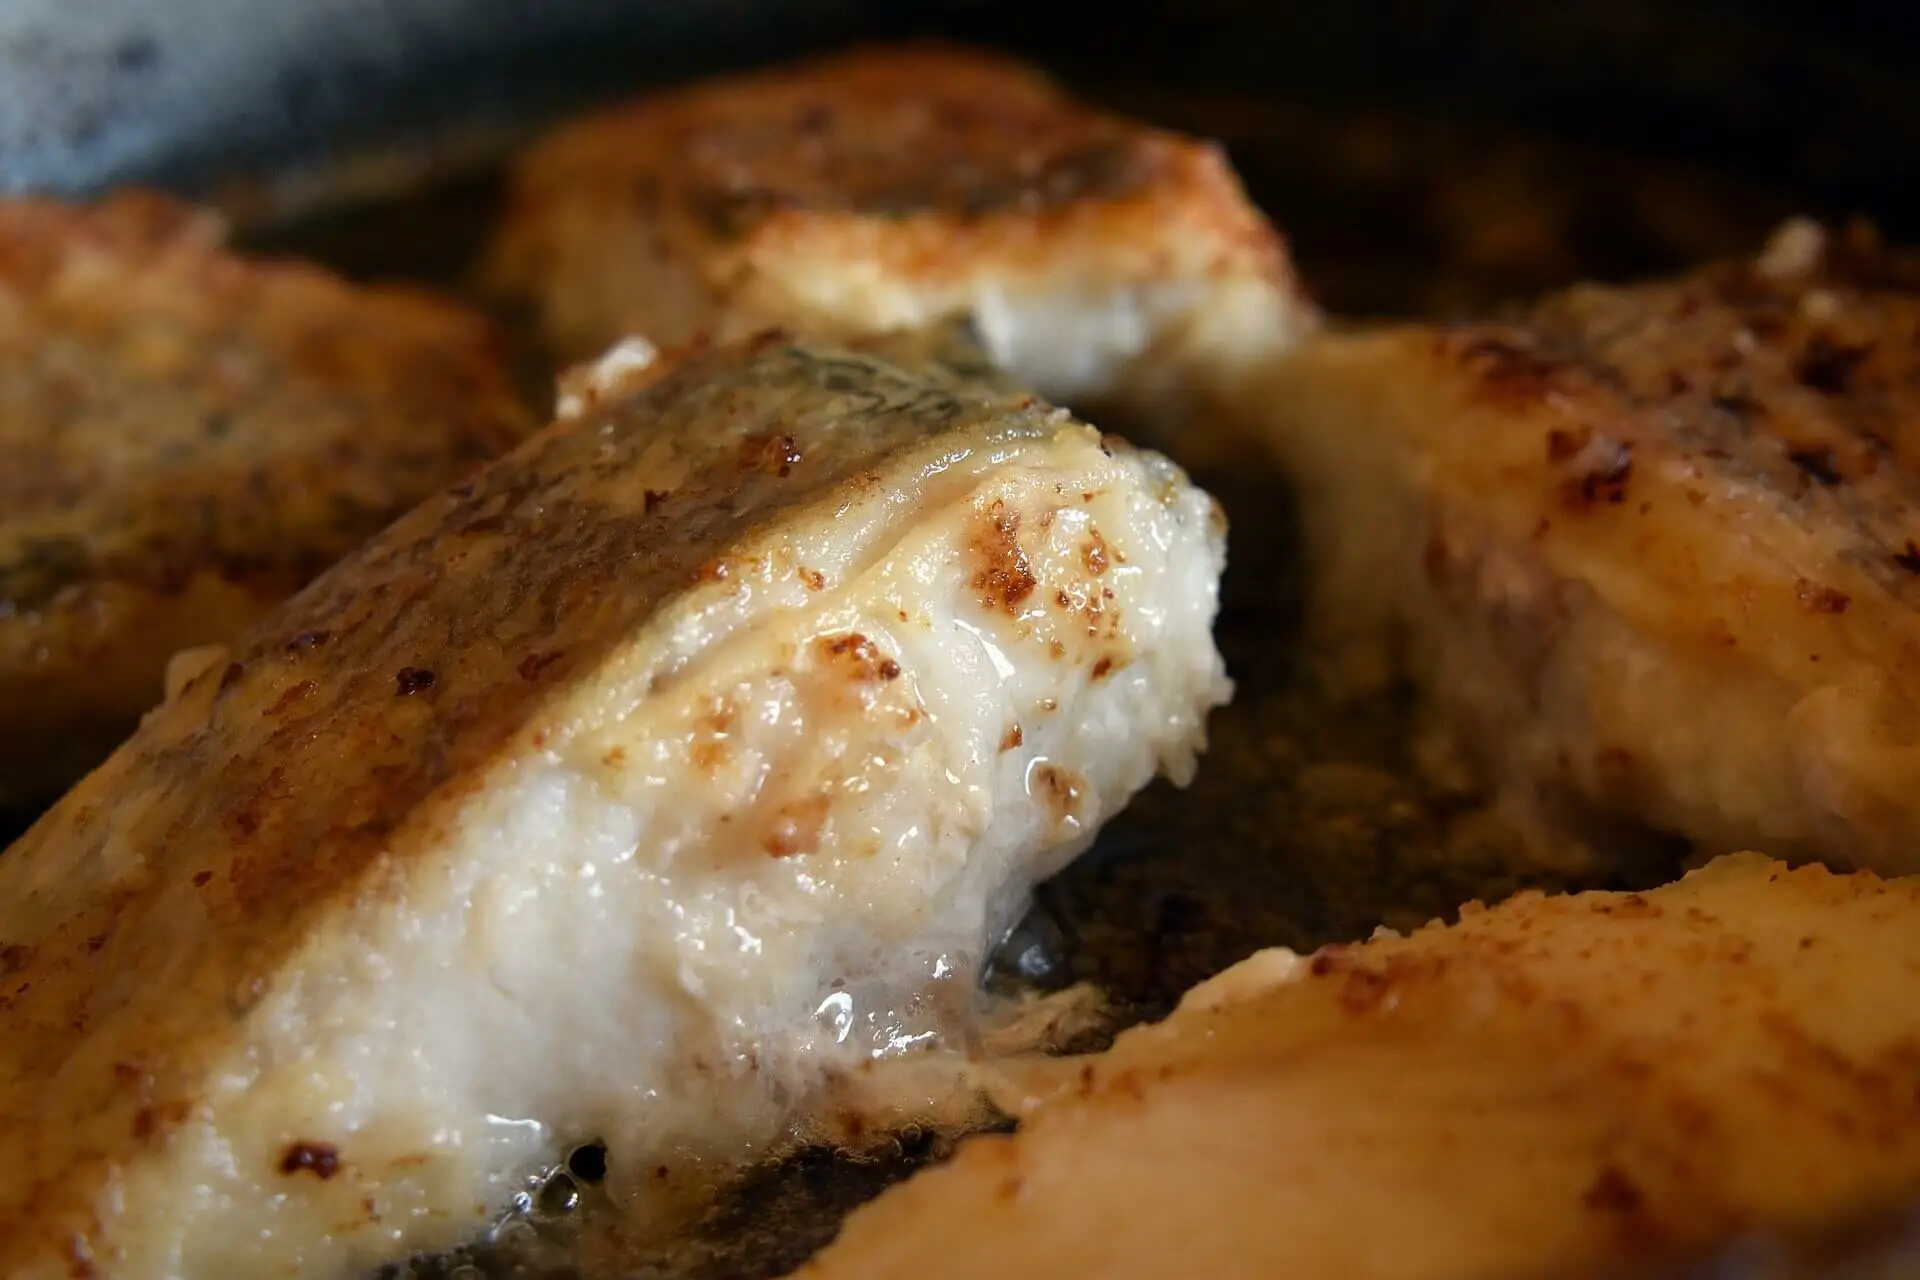 Are muskie good to eat? Pan fried Musky fillet